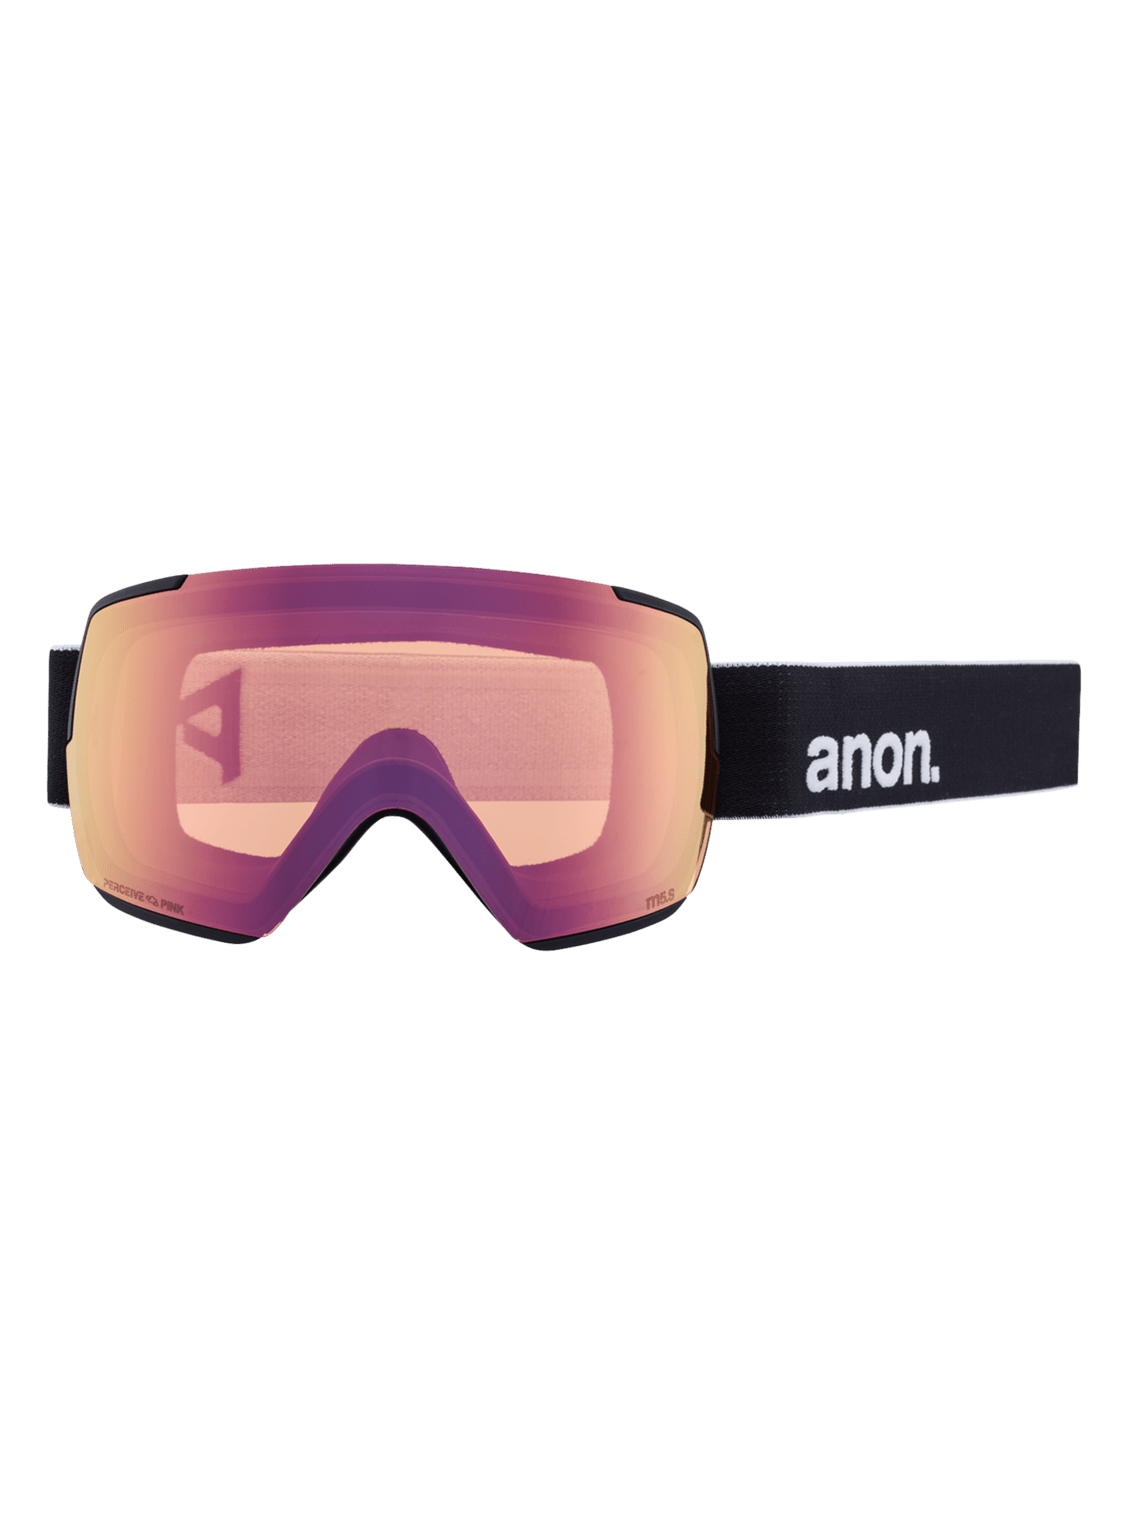 ANON M5S Black - Perceive Variable Blue + Perceive Cloudy Pink+ MFI Facemask Snow Goggle Snow Goggles Anon 